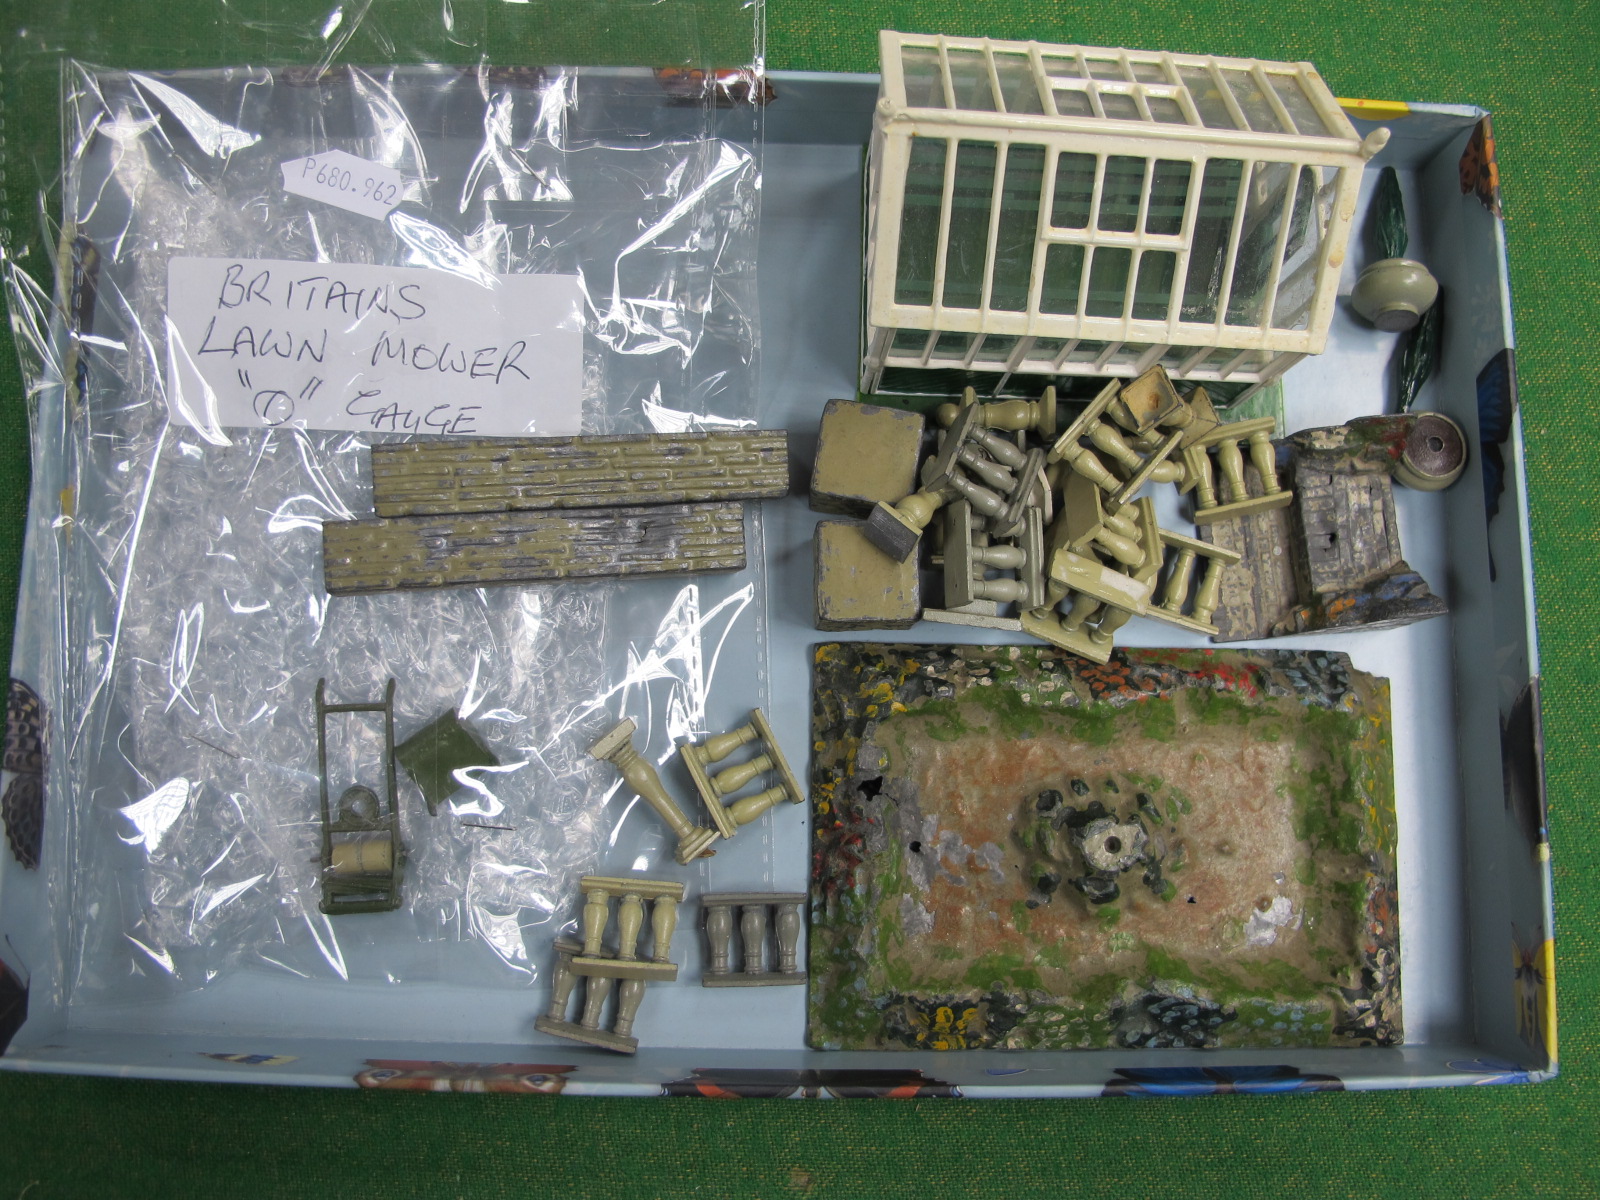 A Small Quantity of Pre-War Britains Lead Garden Items, including a lawn mower, plus a later